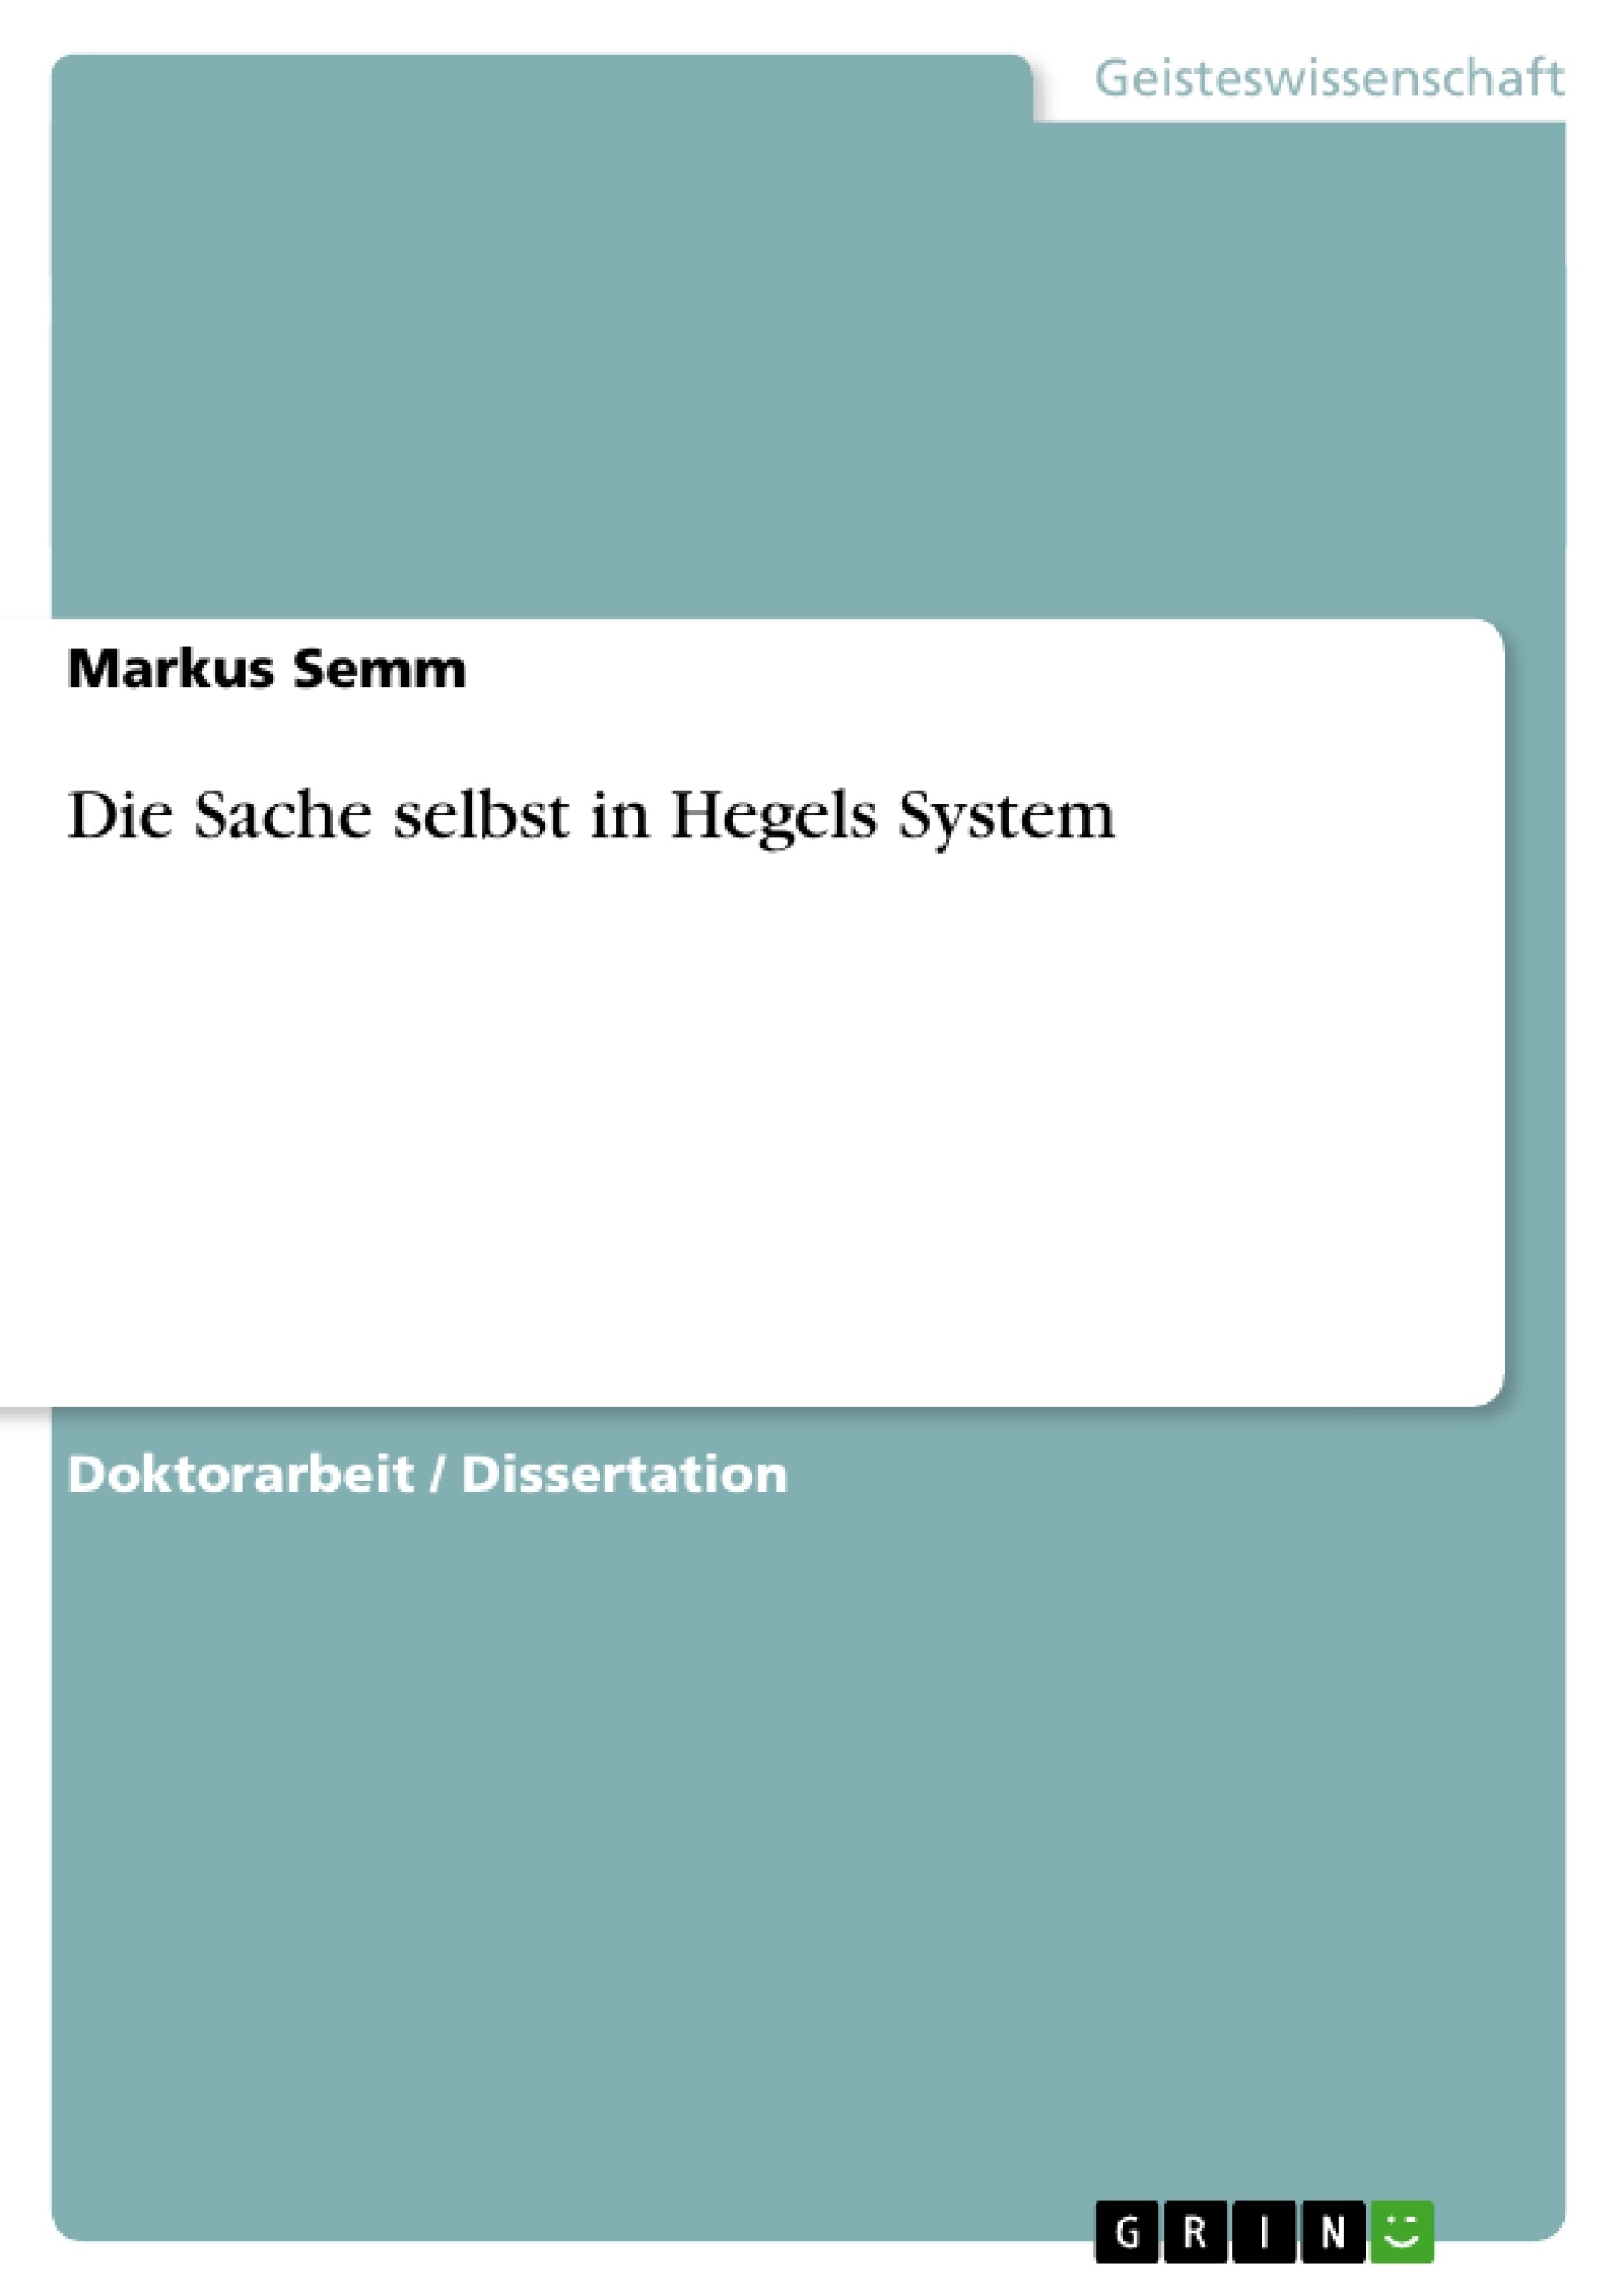 Title: Die Sache selbst in Hegels System